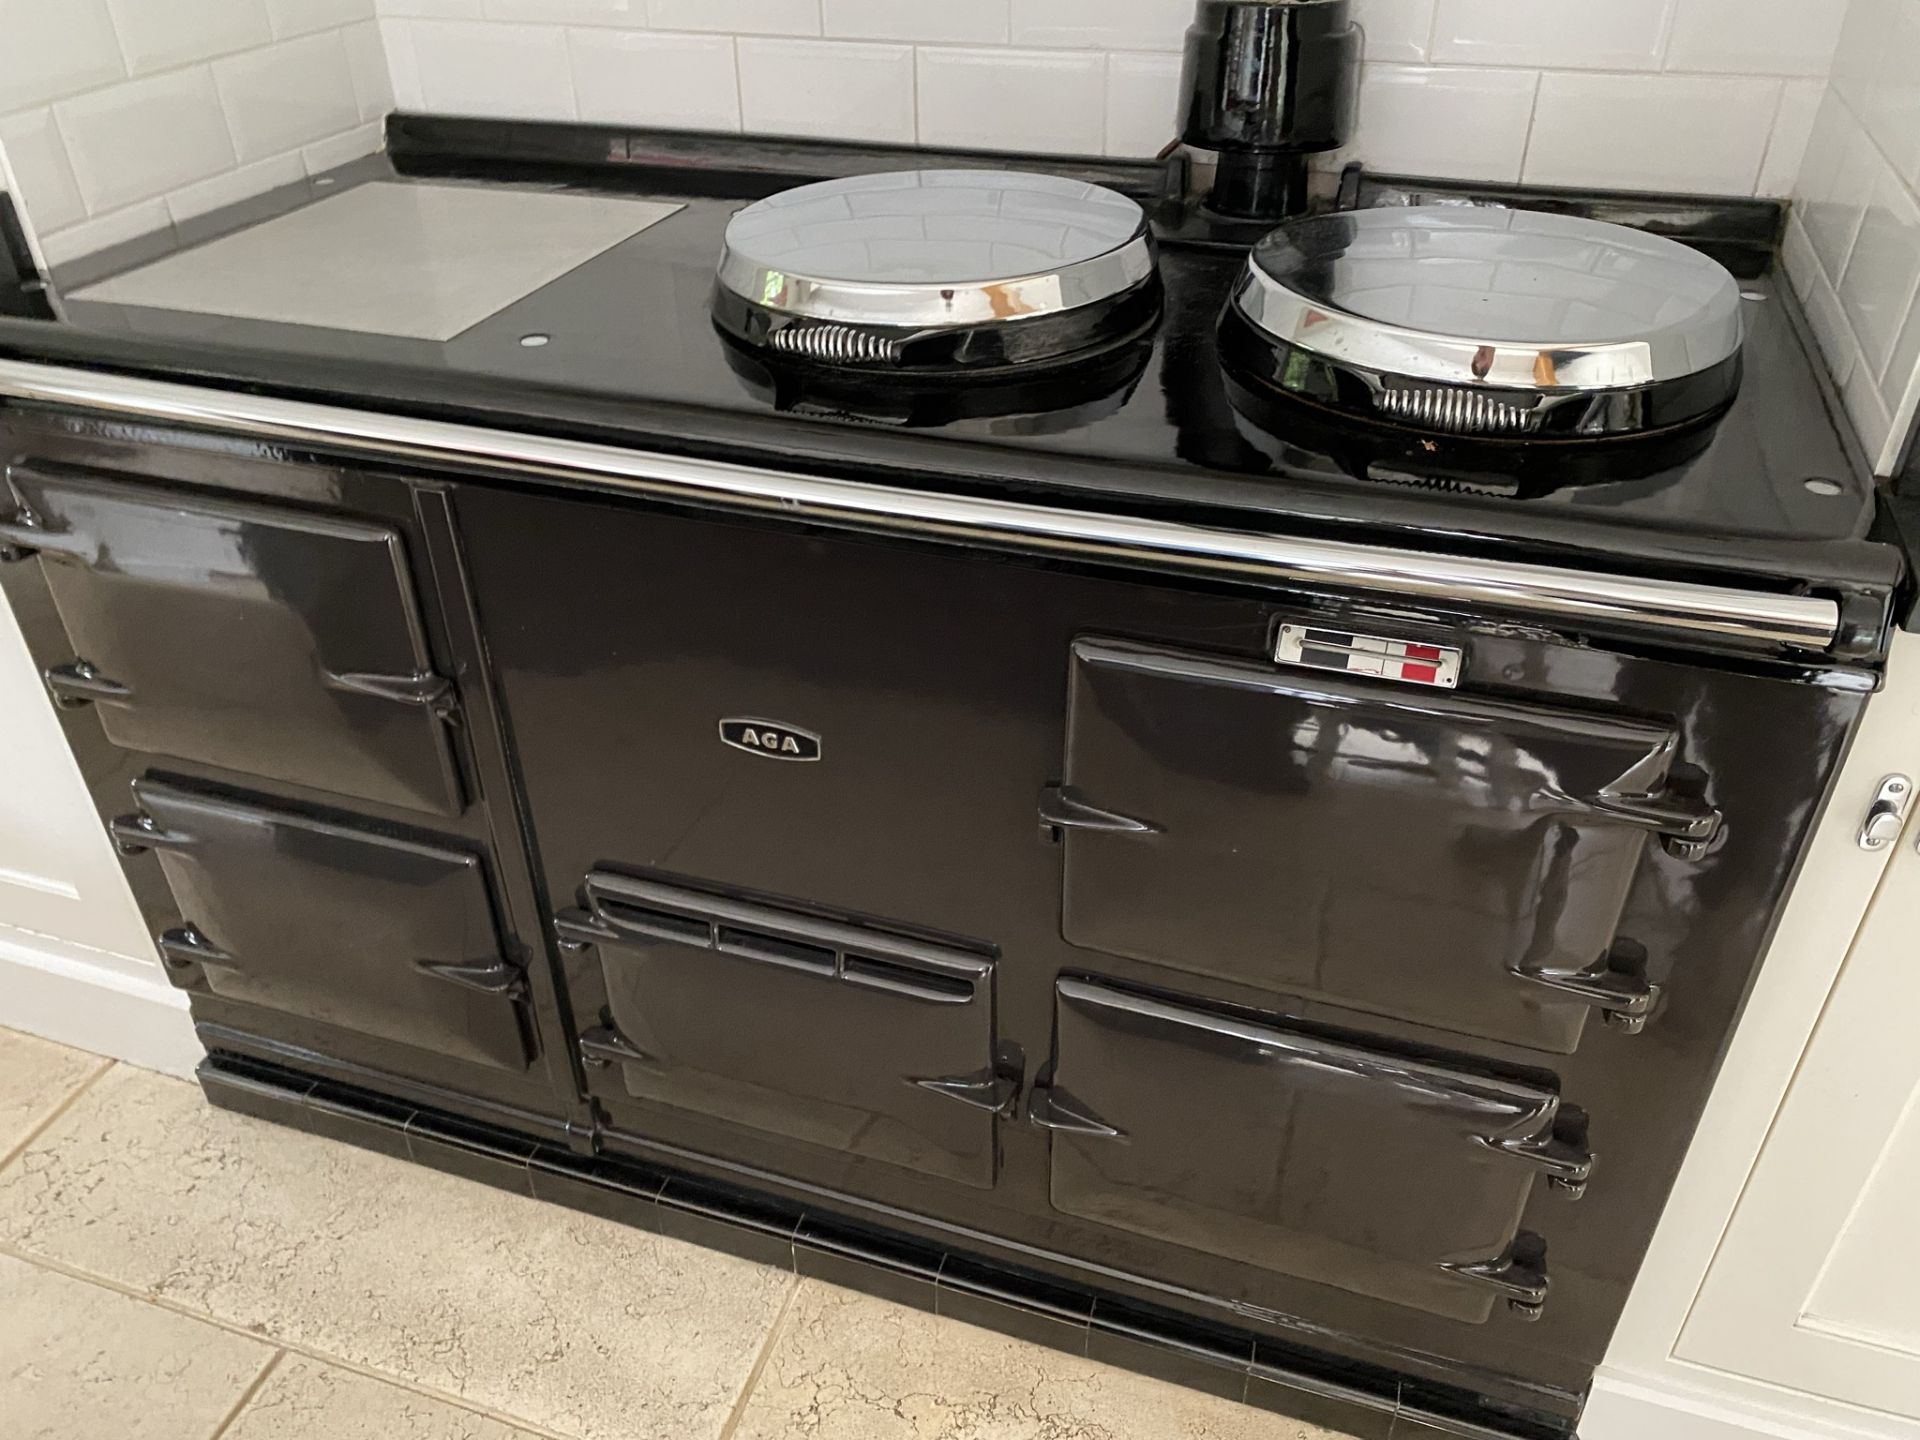 1 x AGA Range Cooker Finished in Black - Features Four Ovens and Two Hot Plates - Recently - Image 5 of 7